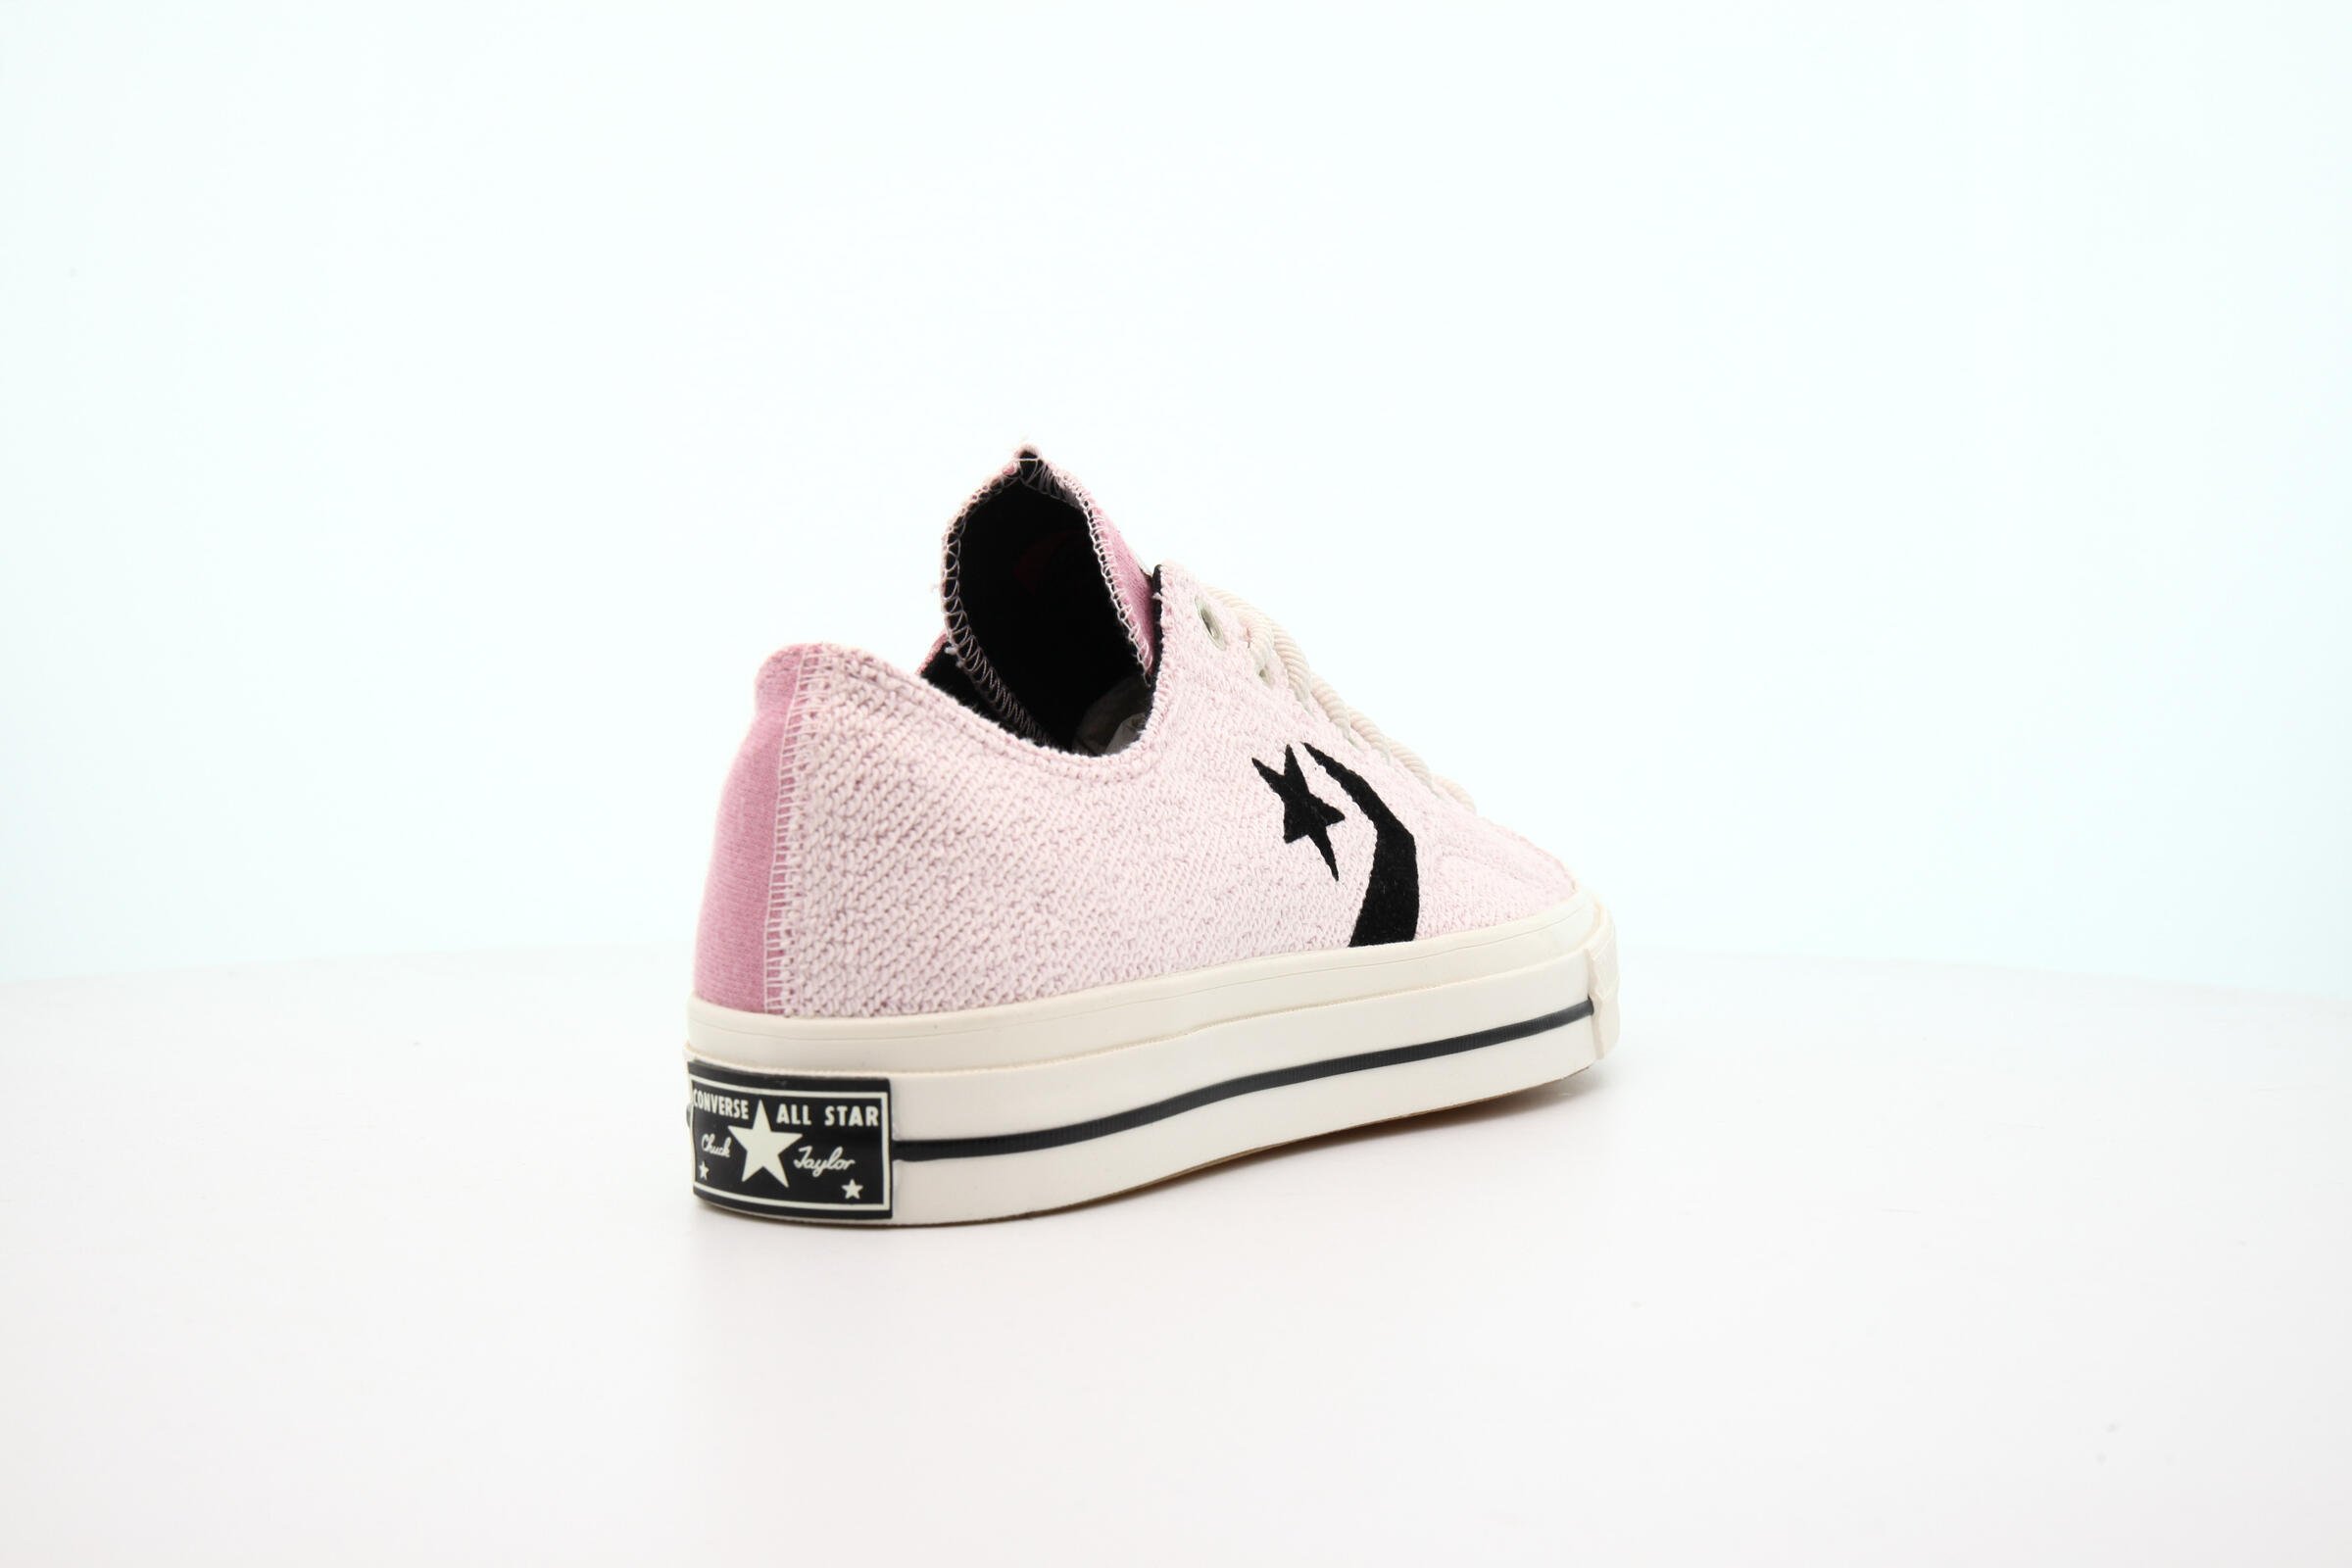 Converse x CONVERSE STAR PLAYER OX REVERSE TERRY "LOTUS PINK"